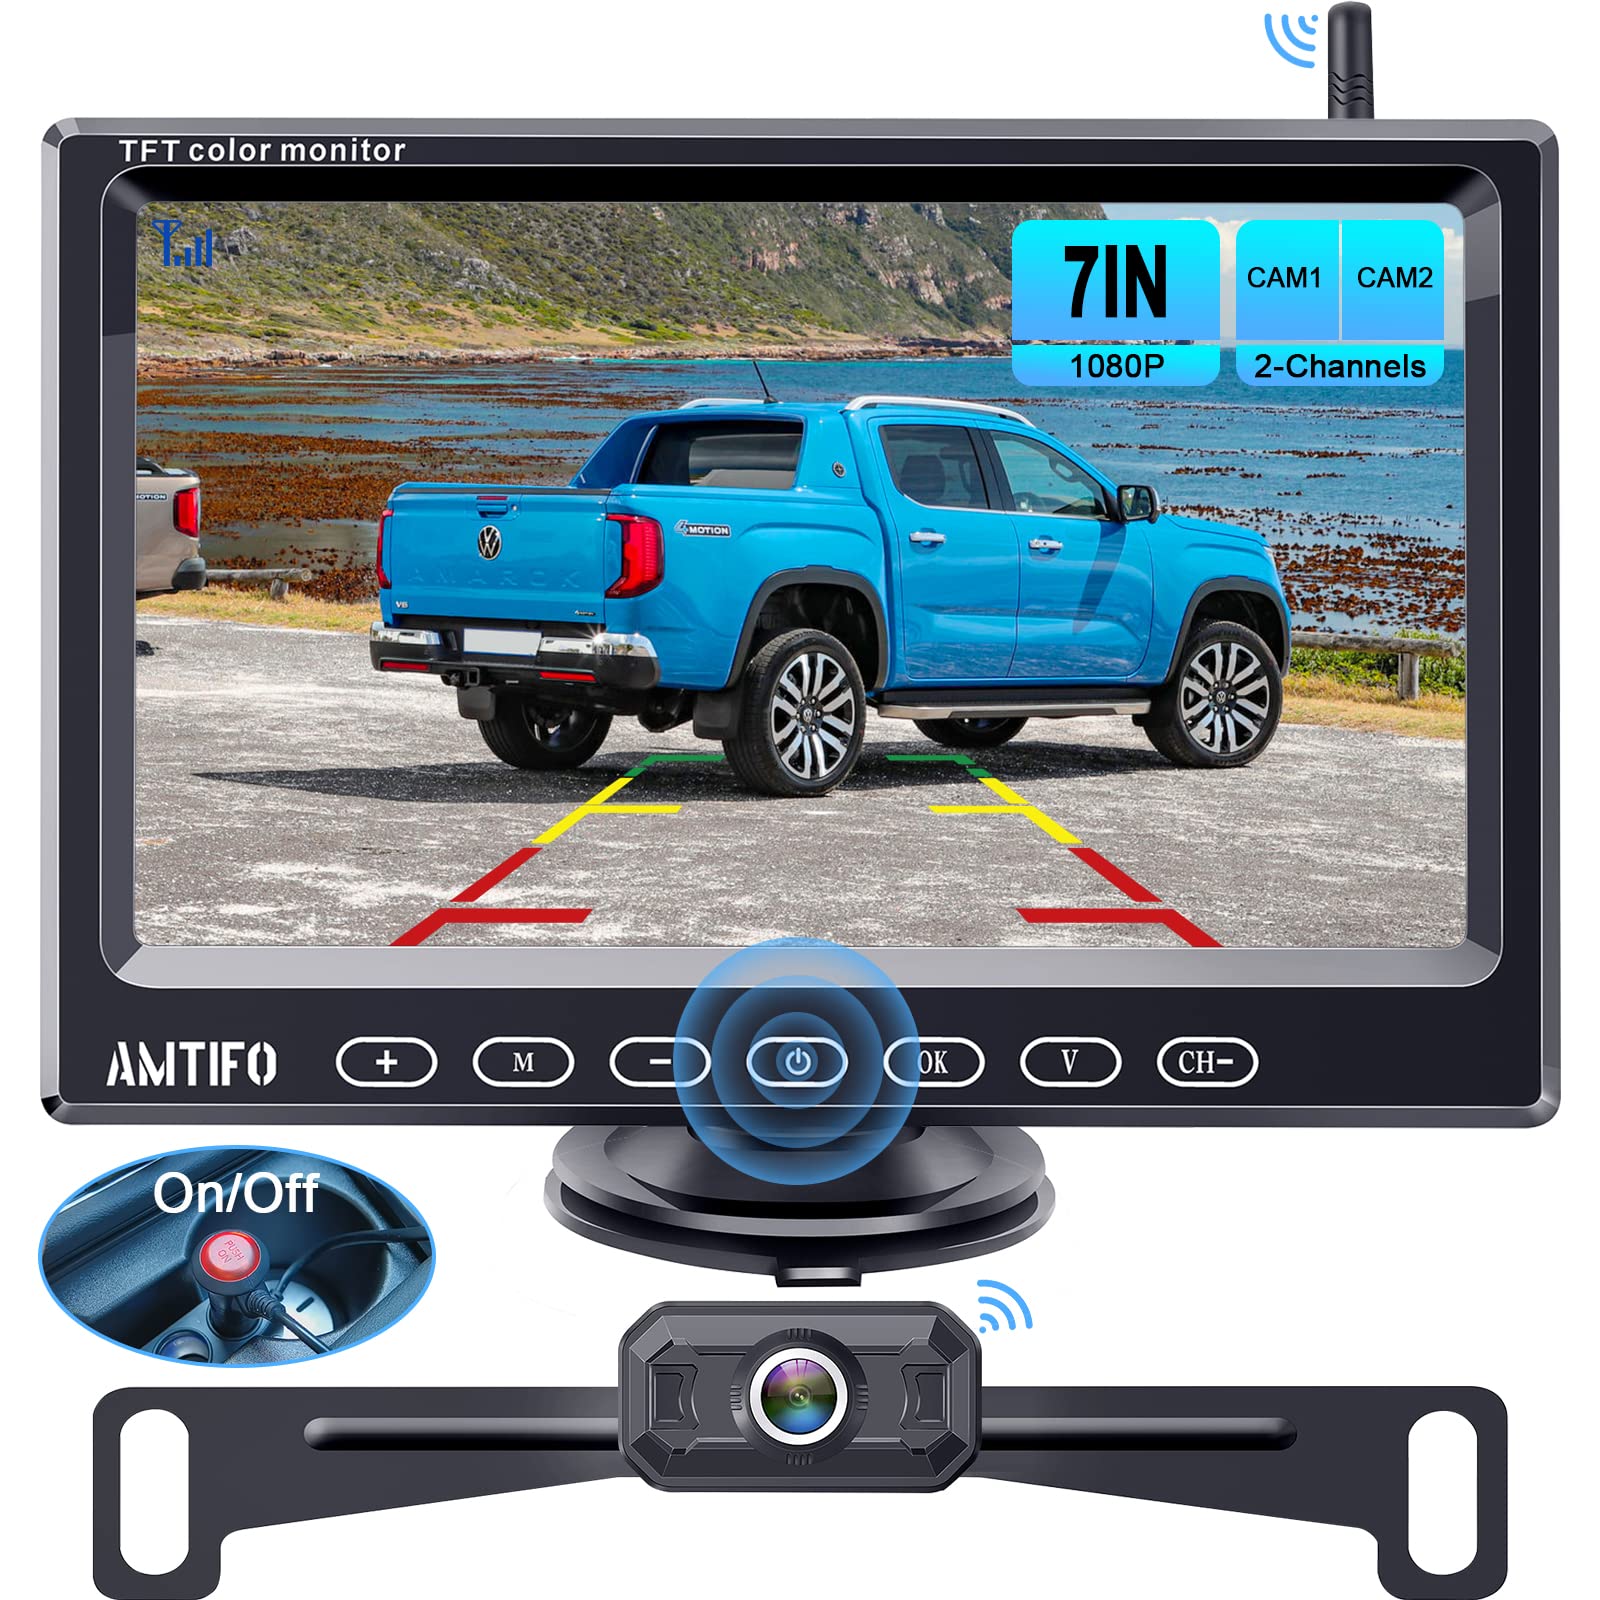 AMTIFO Wireless Backup Camera Car Truck HD 1080P 7 Inch Monitor Easy Install Rear View Camera System 2 Channels Color Night V